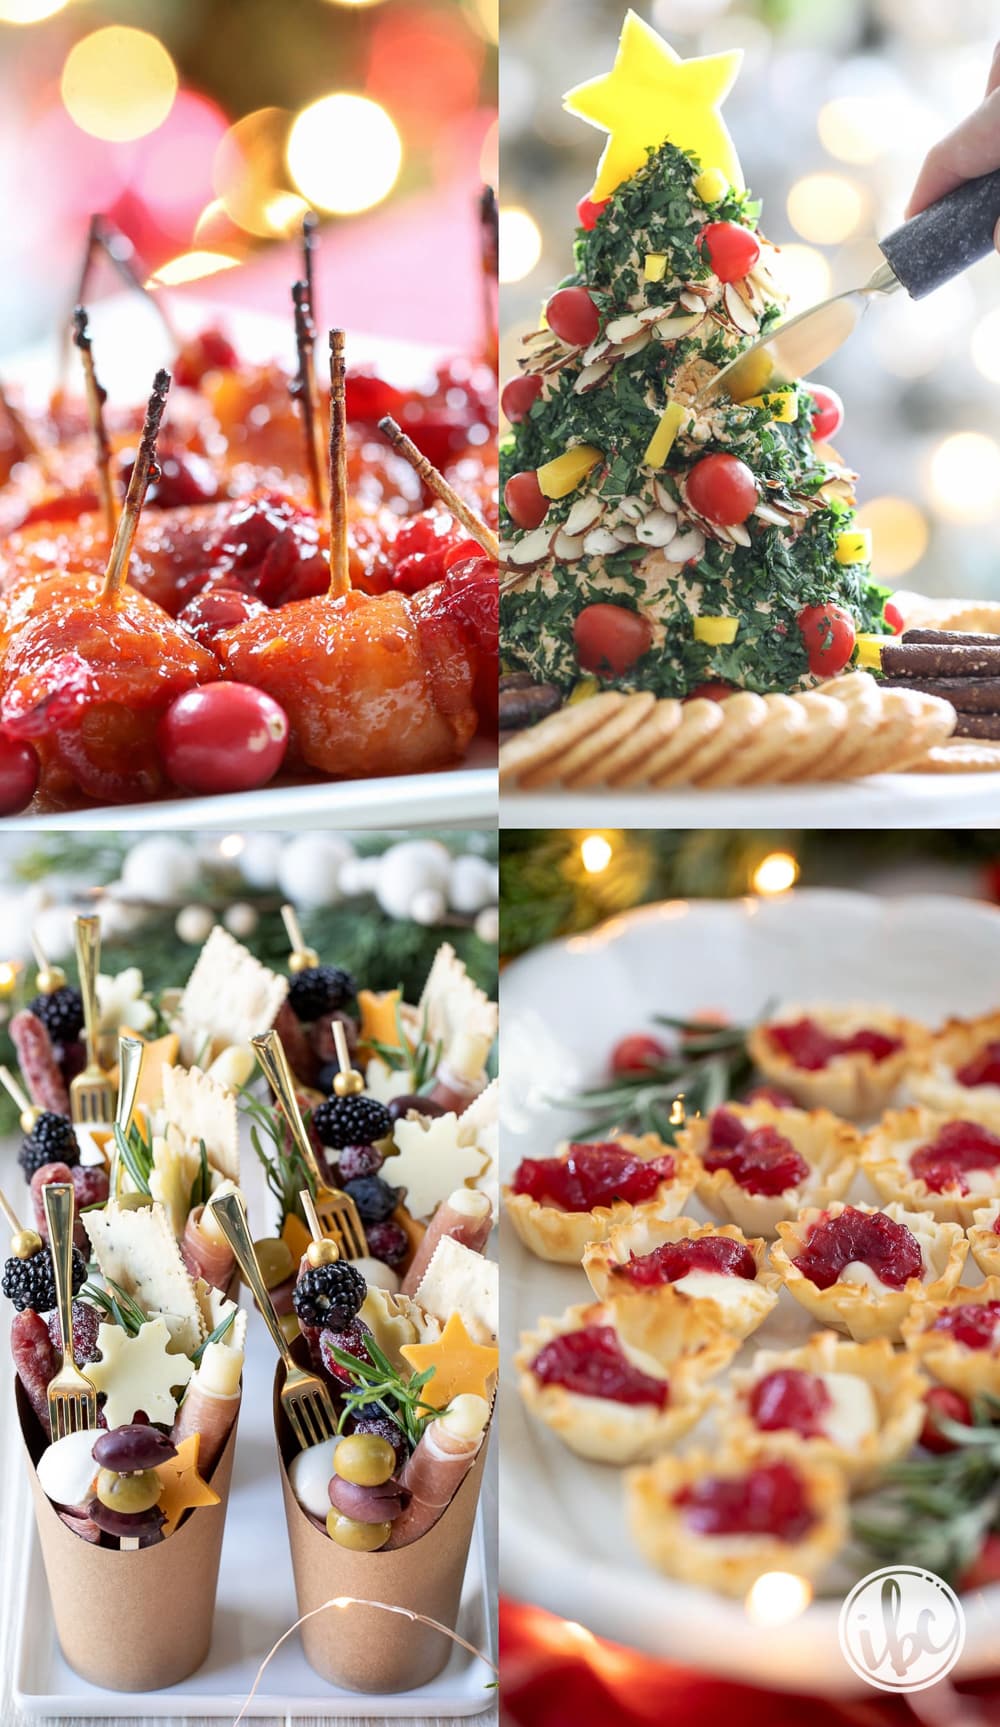 Cheeseball: Top Picks for Delicious Party Appetizers and Creative Serving Ideas